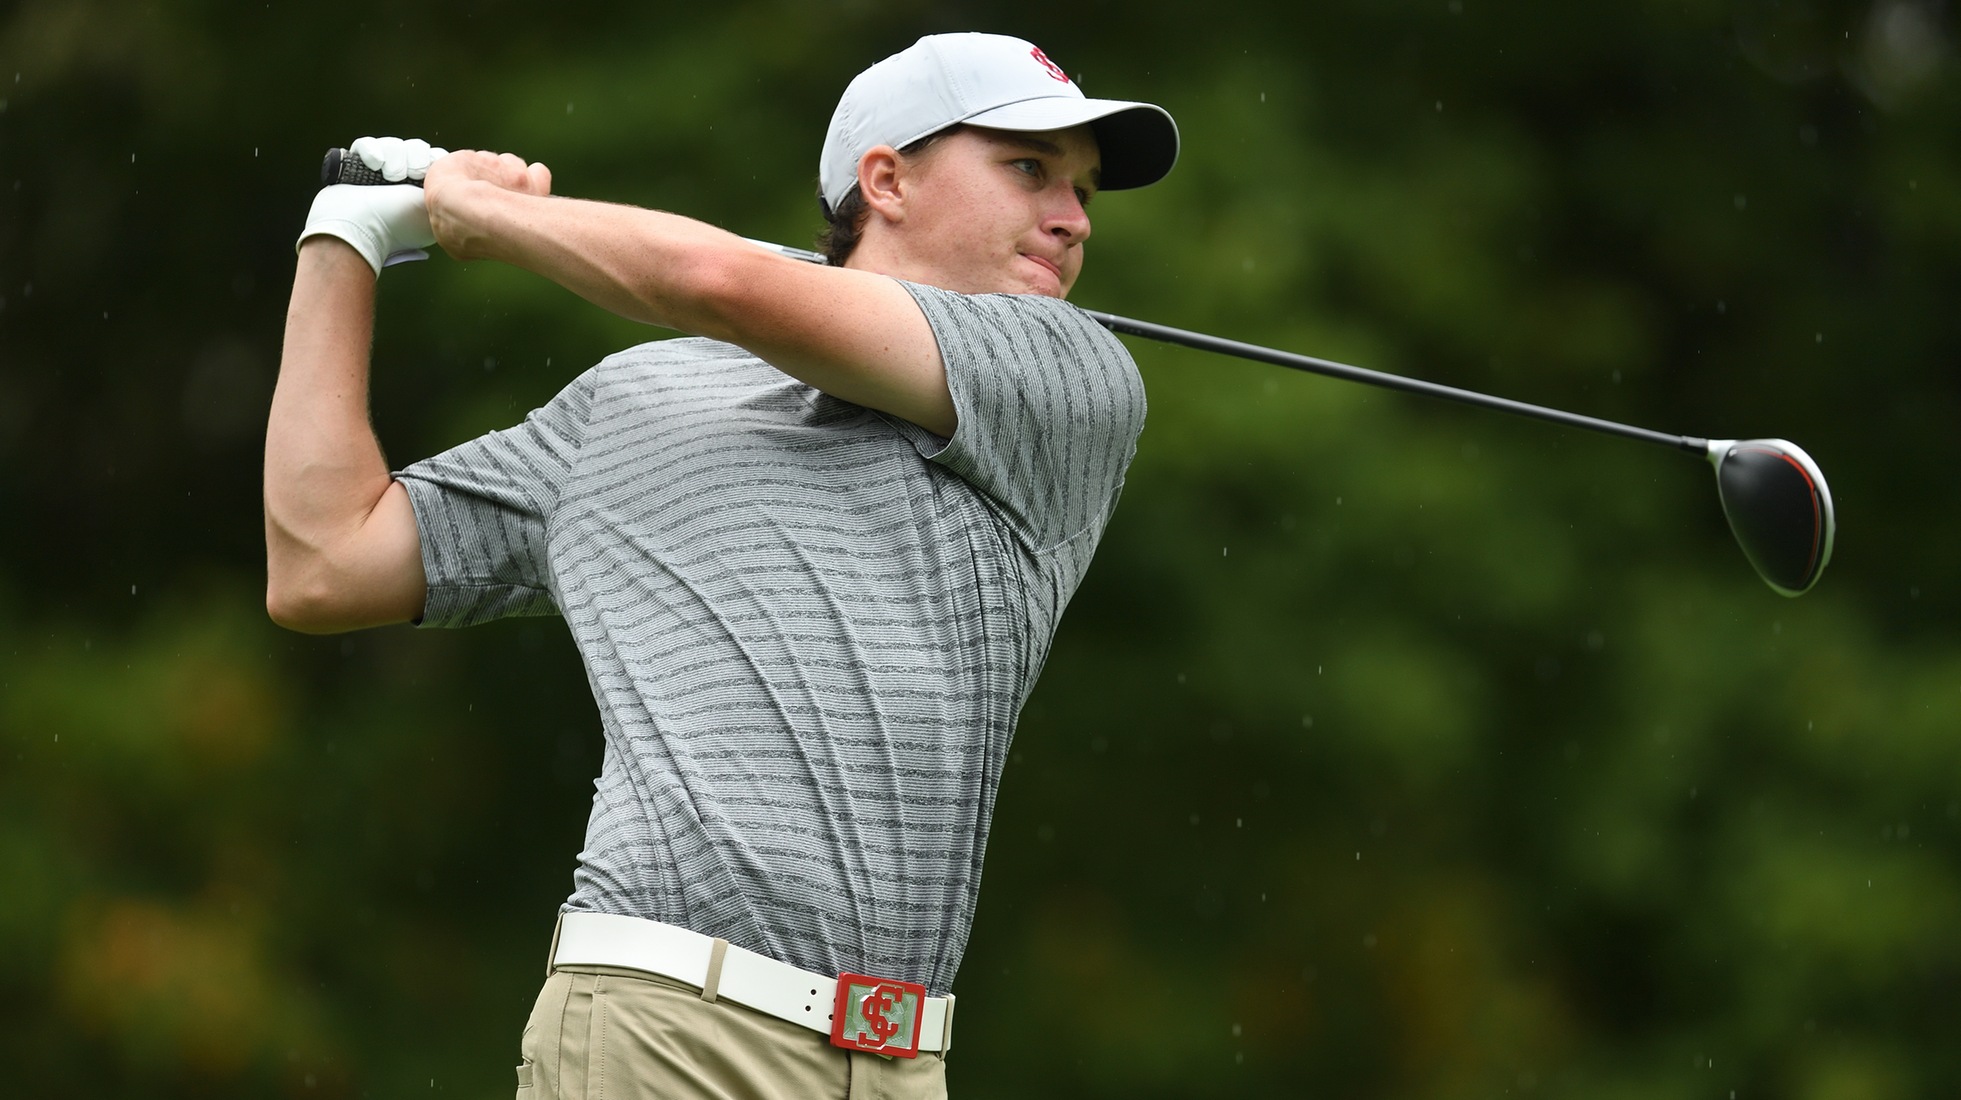 Men's Golf Tied for 15th After 36 Holes at John A. Burns Intercollegiate